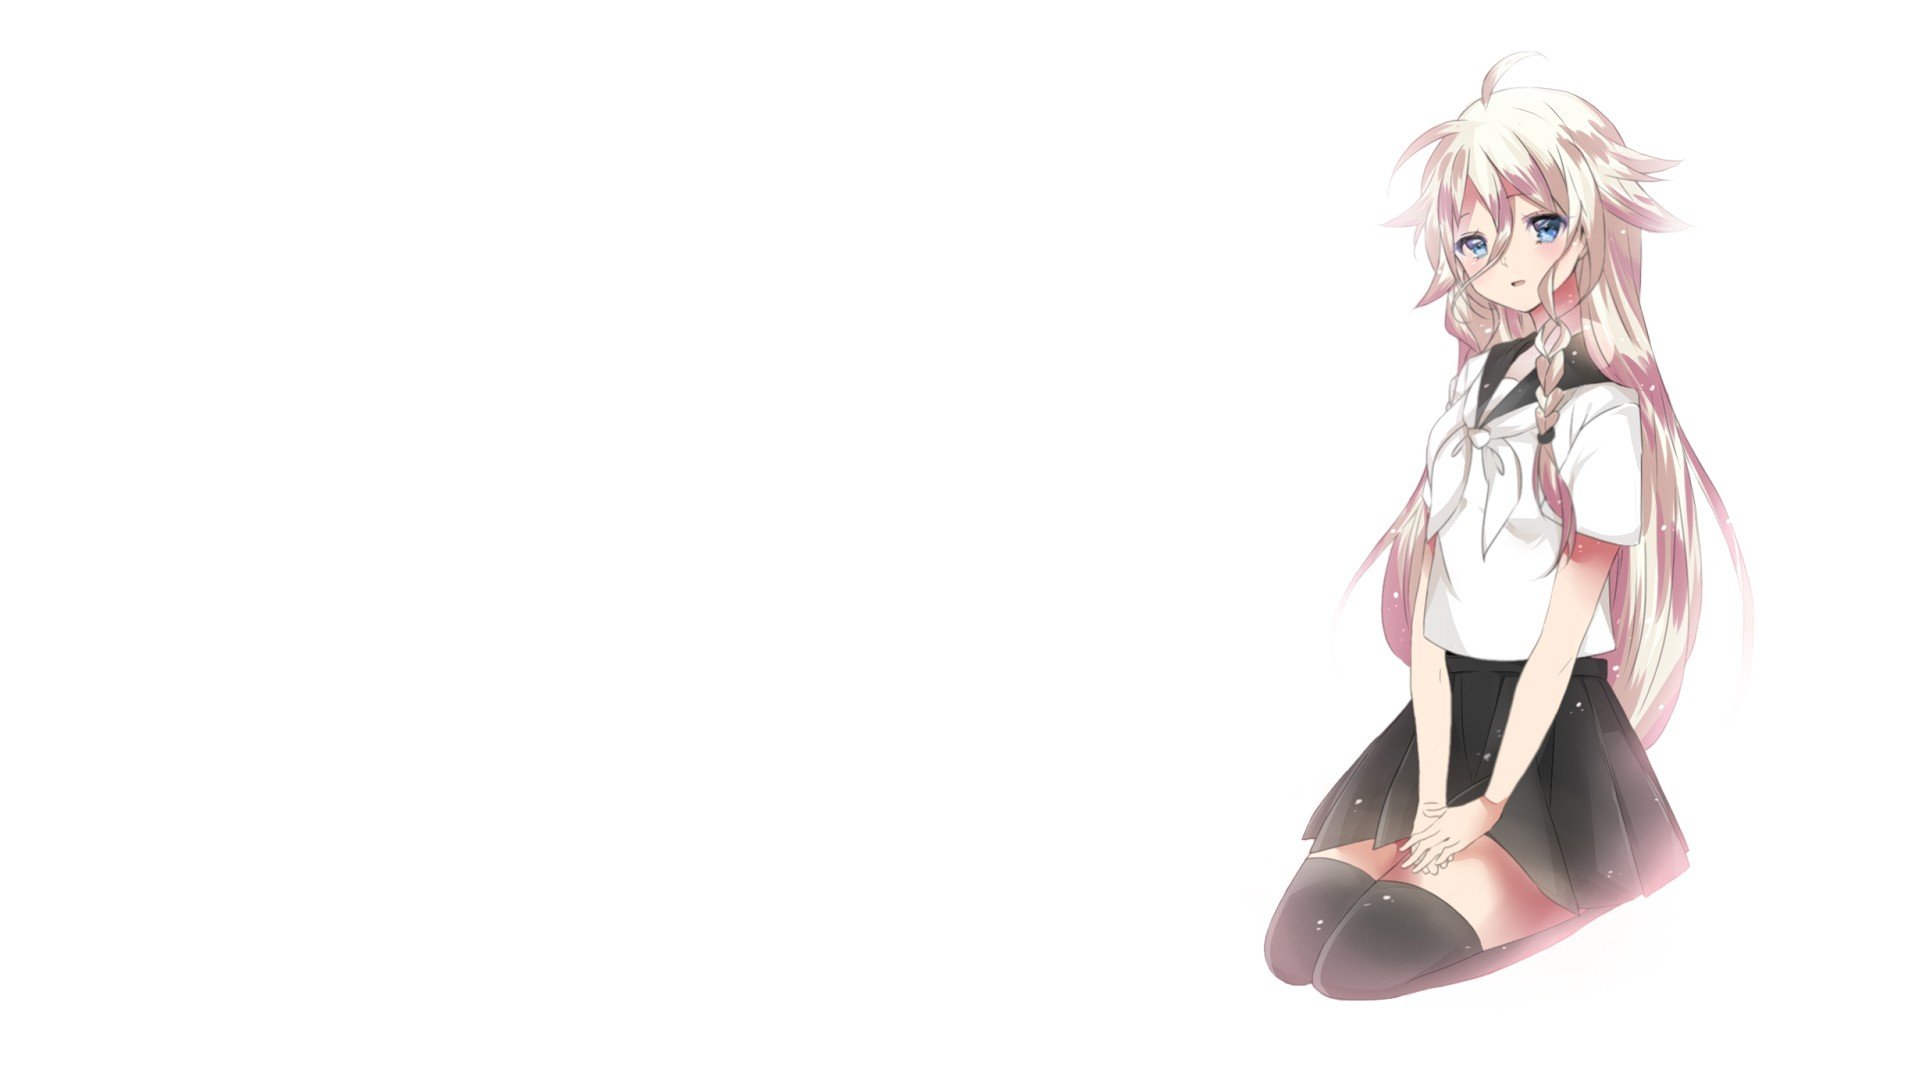 vocaloid, Blue, Eyes, School, Uniforms, Tie, Skirts, Long, Hair, Thigh, Highs, Blush, Shirts, Sitting, Open, Mouth, Braids, White, Hair, Ahoge, Simple, Background, Anime, Girls, White, Background Wallpaper